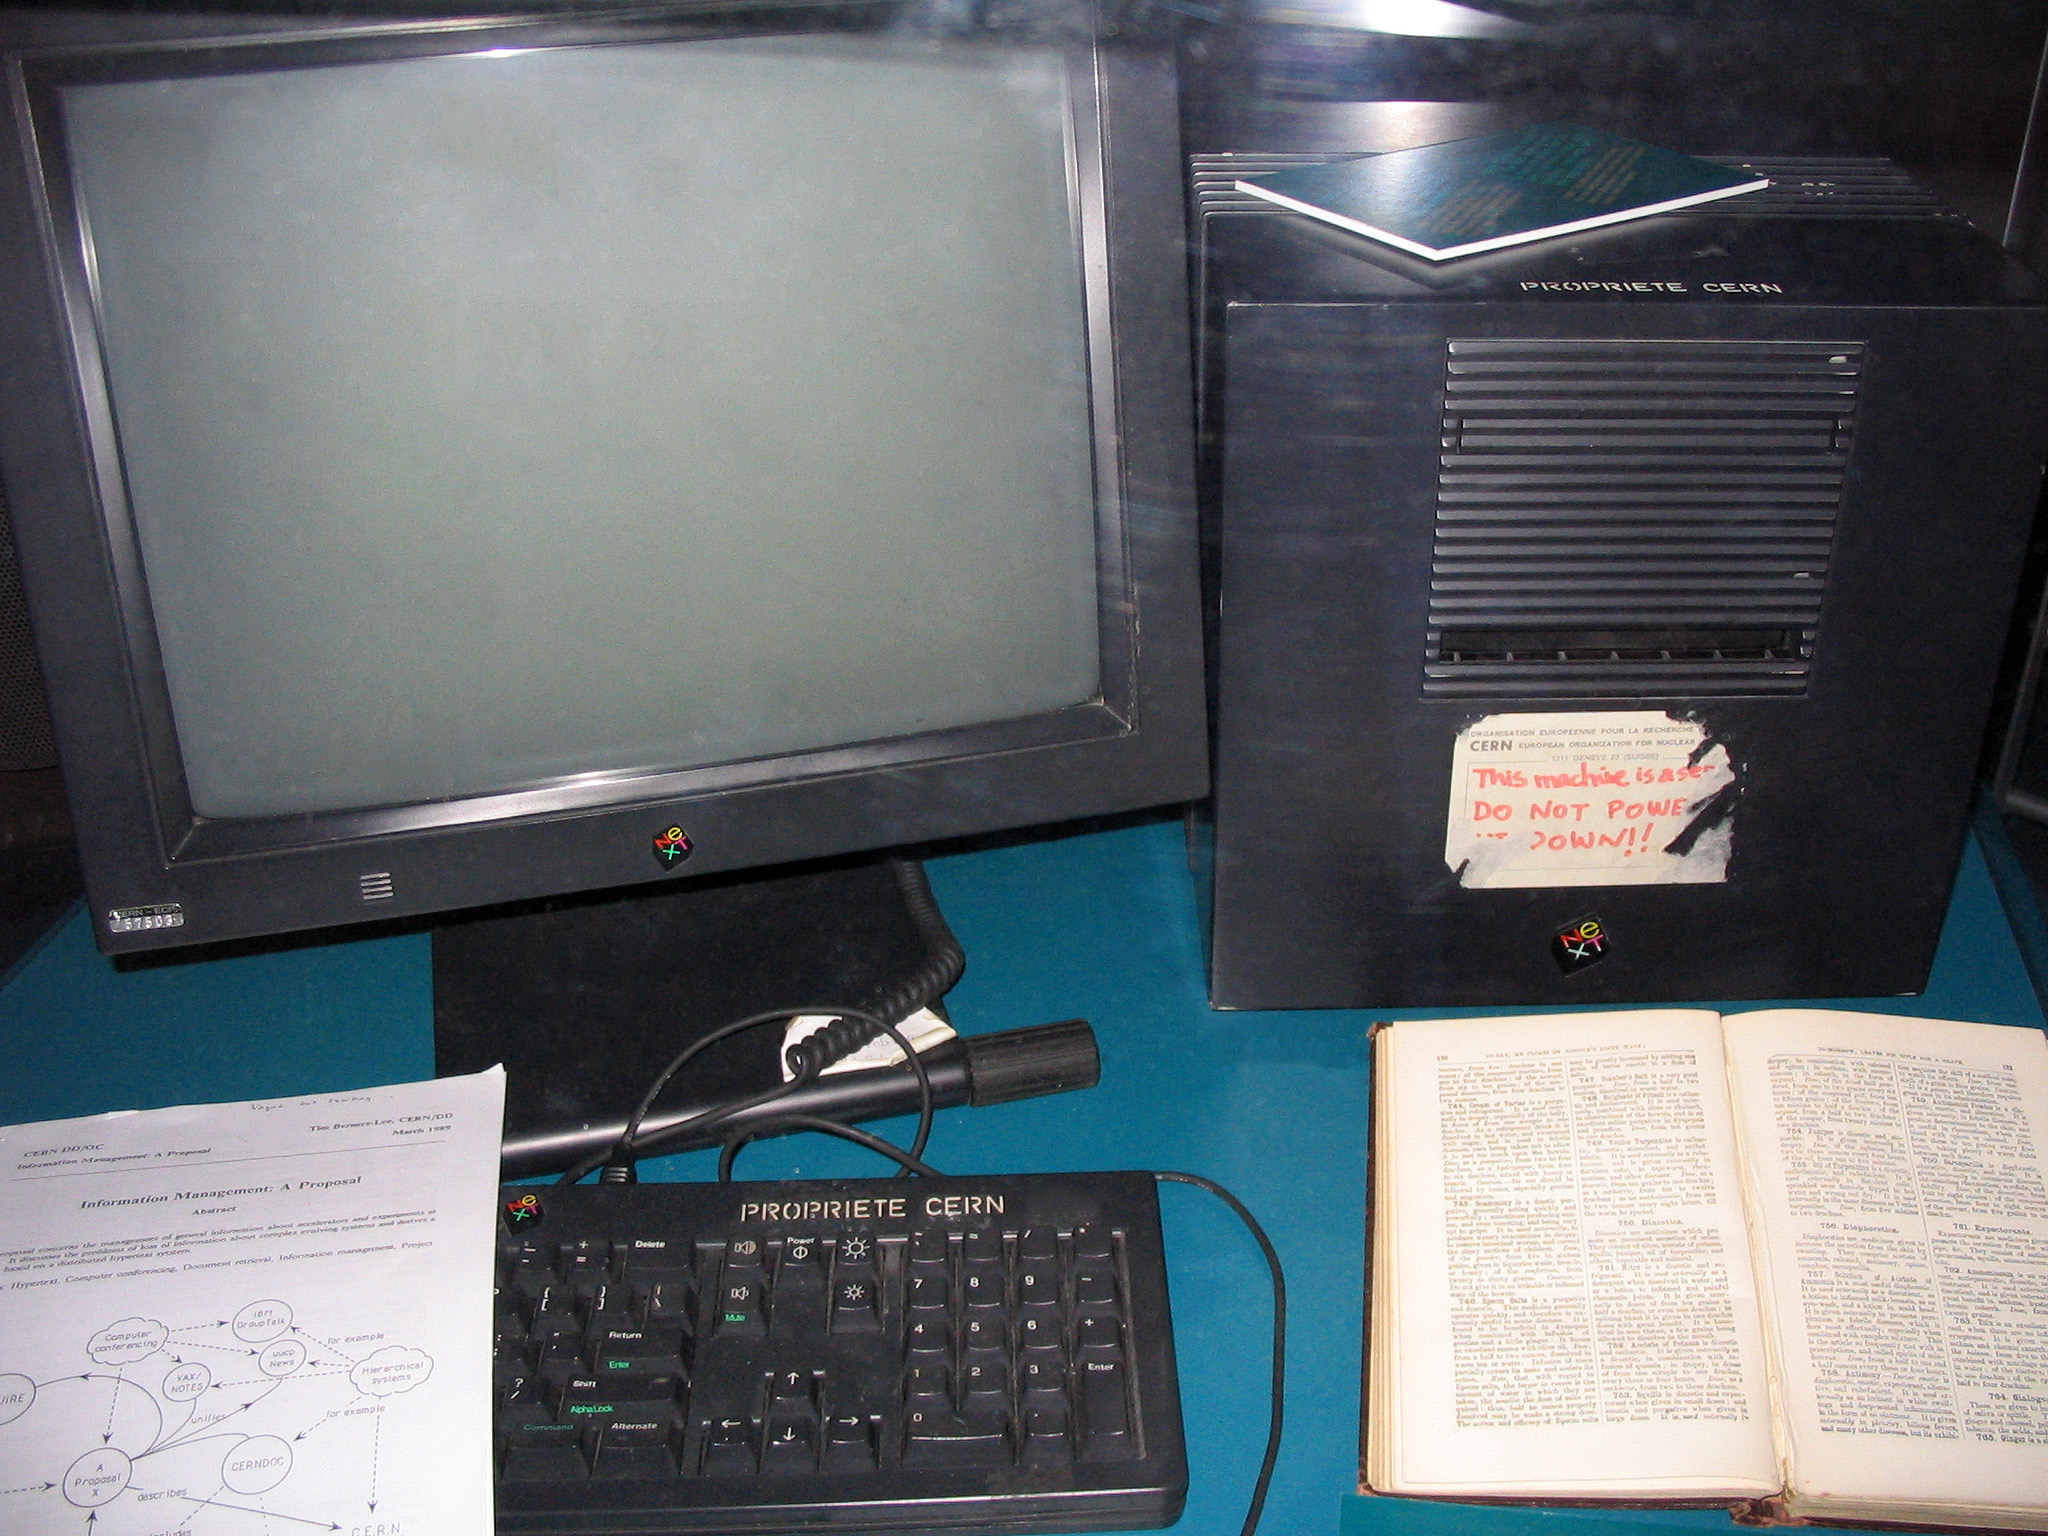 caption="This NeXT Computer was used by Berners-Lee at CERN and became the world's first web server" [1] Coolcaesar at the English-language Wikipedia, CC BY-SA 3.0 <http://creativecommons.org/licenses/by-sa/3.0/>, via Wikimedia Commons